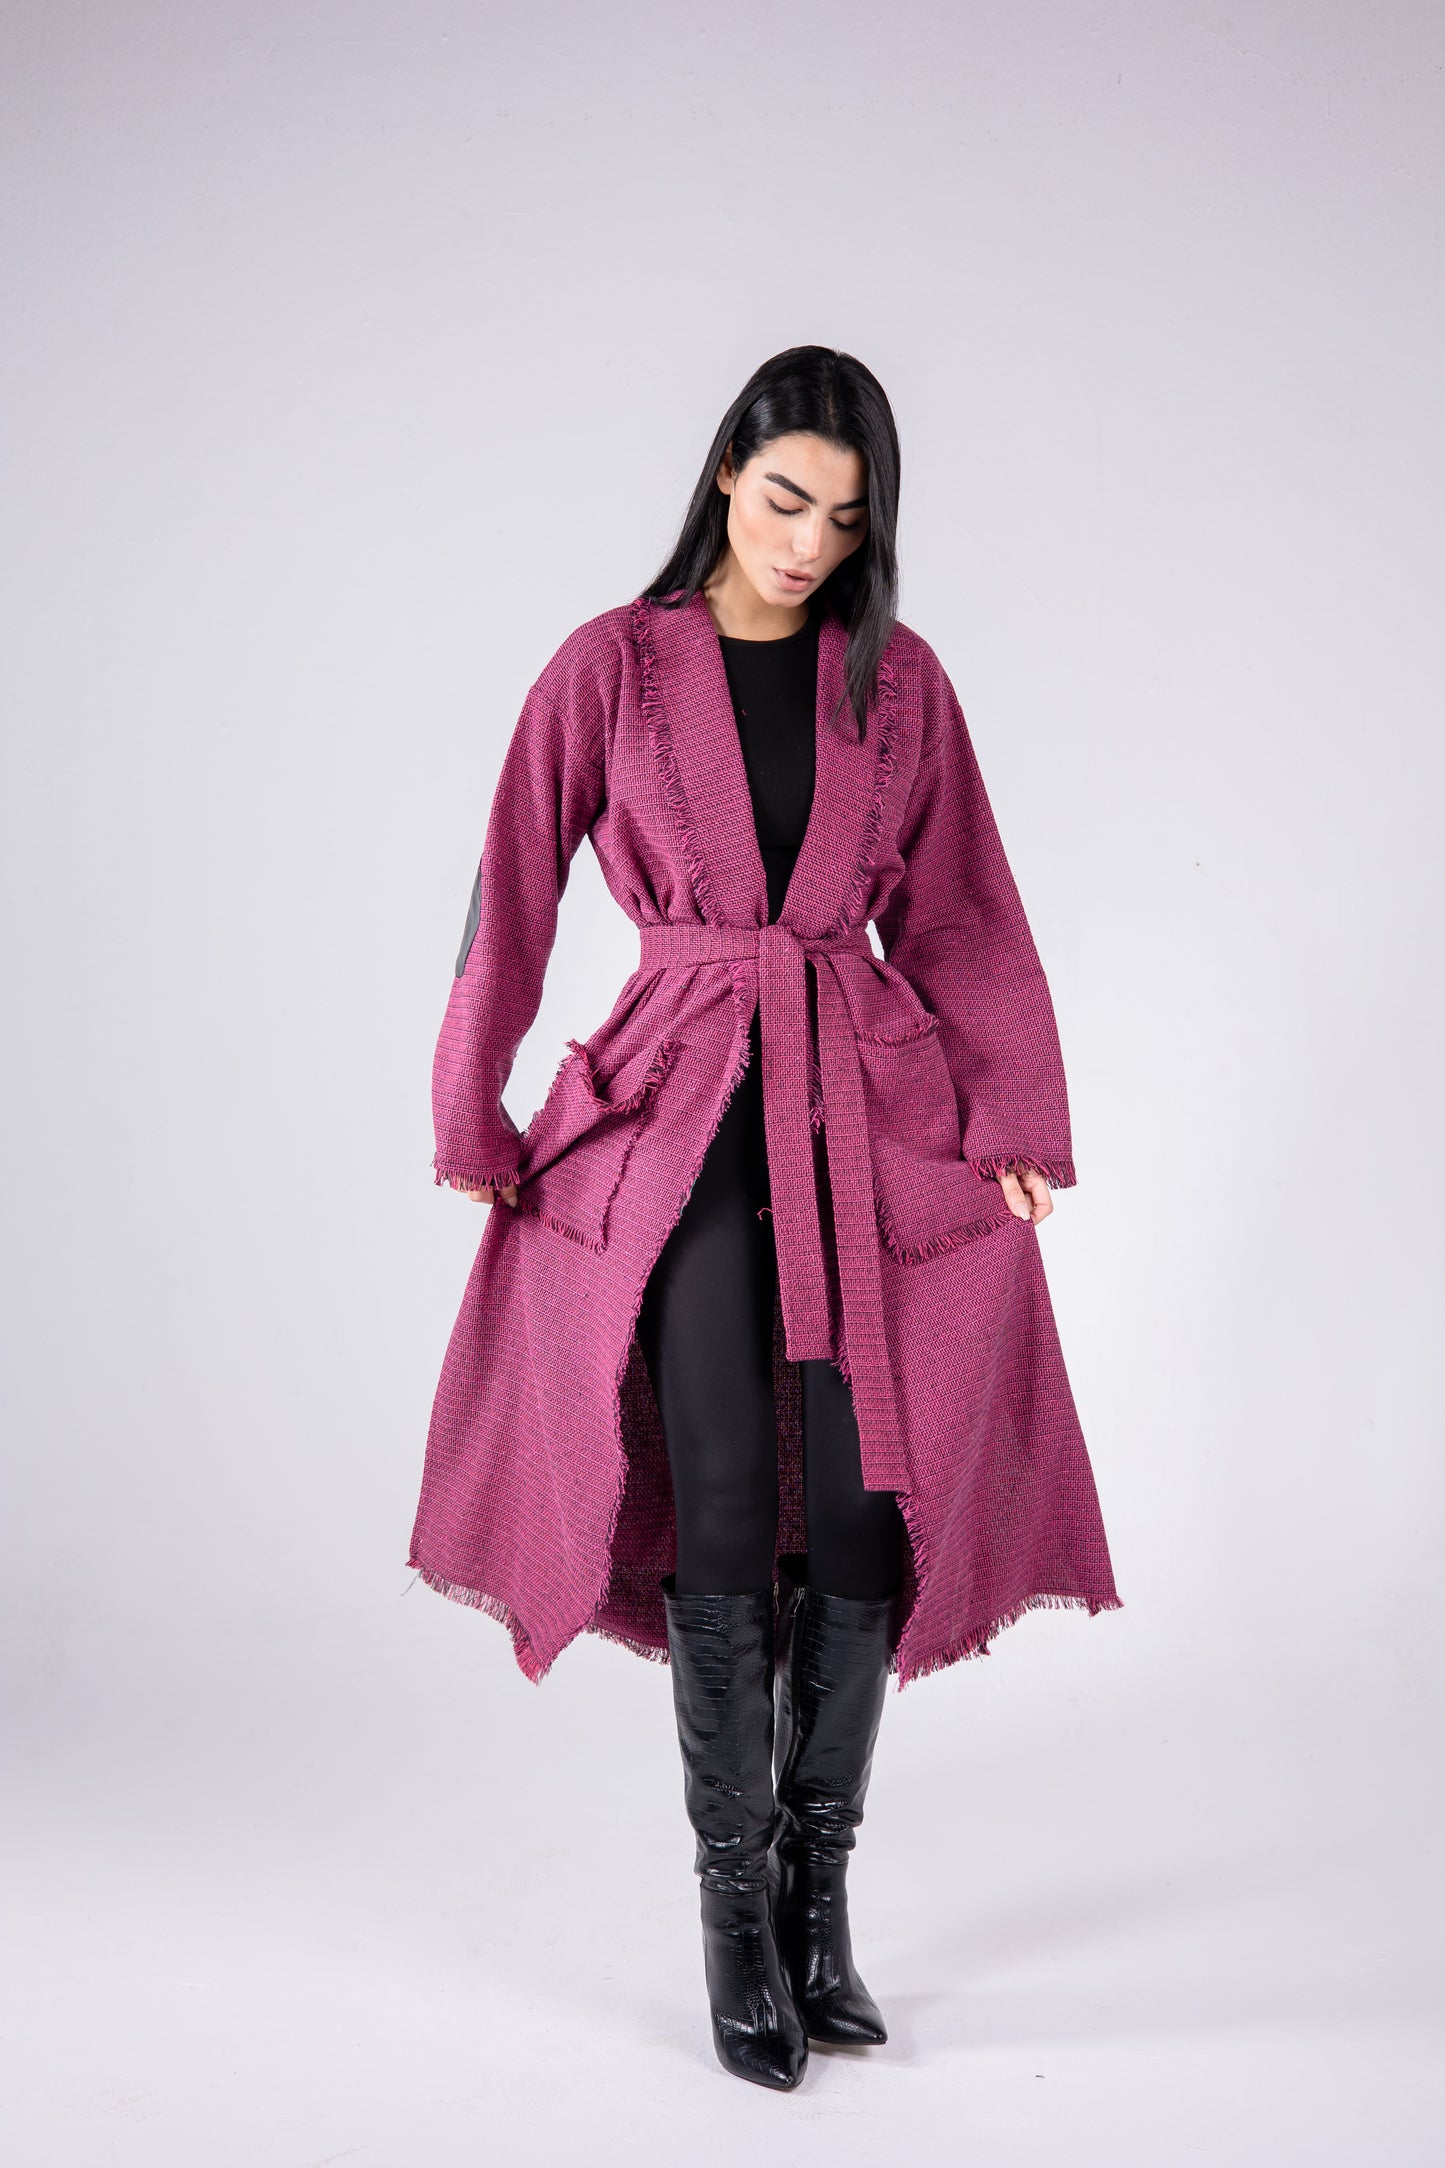 The eve manteau in maroon pink